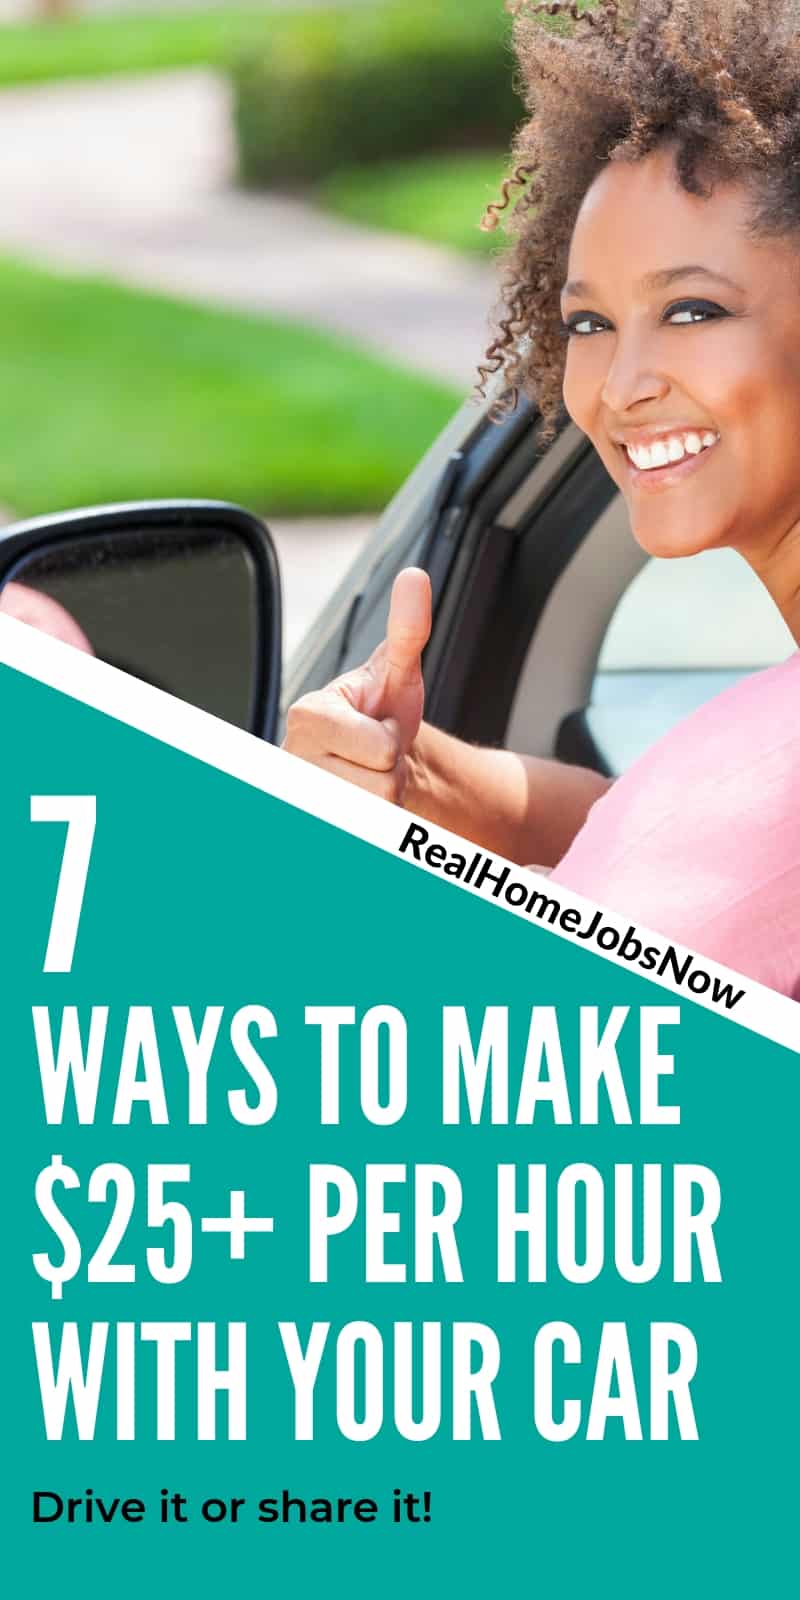 Make money with your car while you make money at home, or drive your car for extra cash! Here are a few ways to let your car help pay for itself! #extramoney #extraincome #extracash